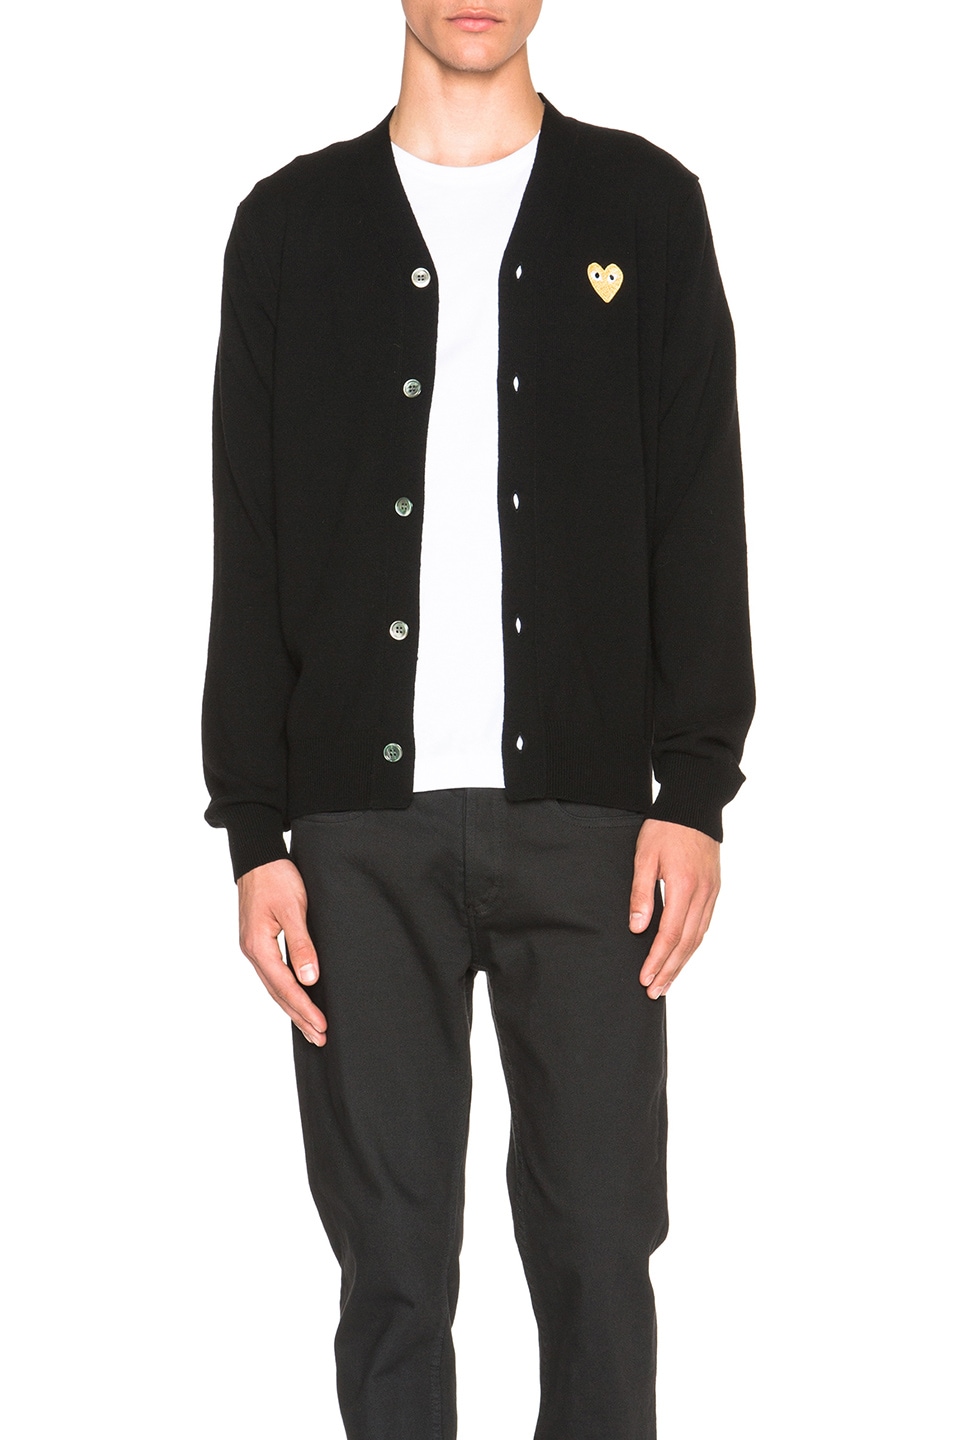 Кардиган Comme des Garçons With Gold Emblem, черный кардиган comme des garçons lambswool with red emblem темно синий